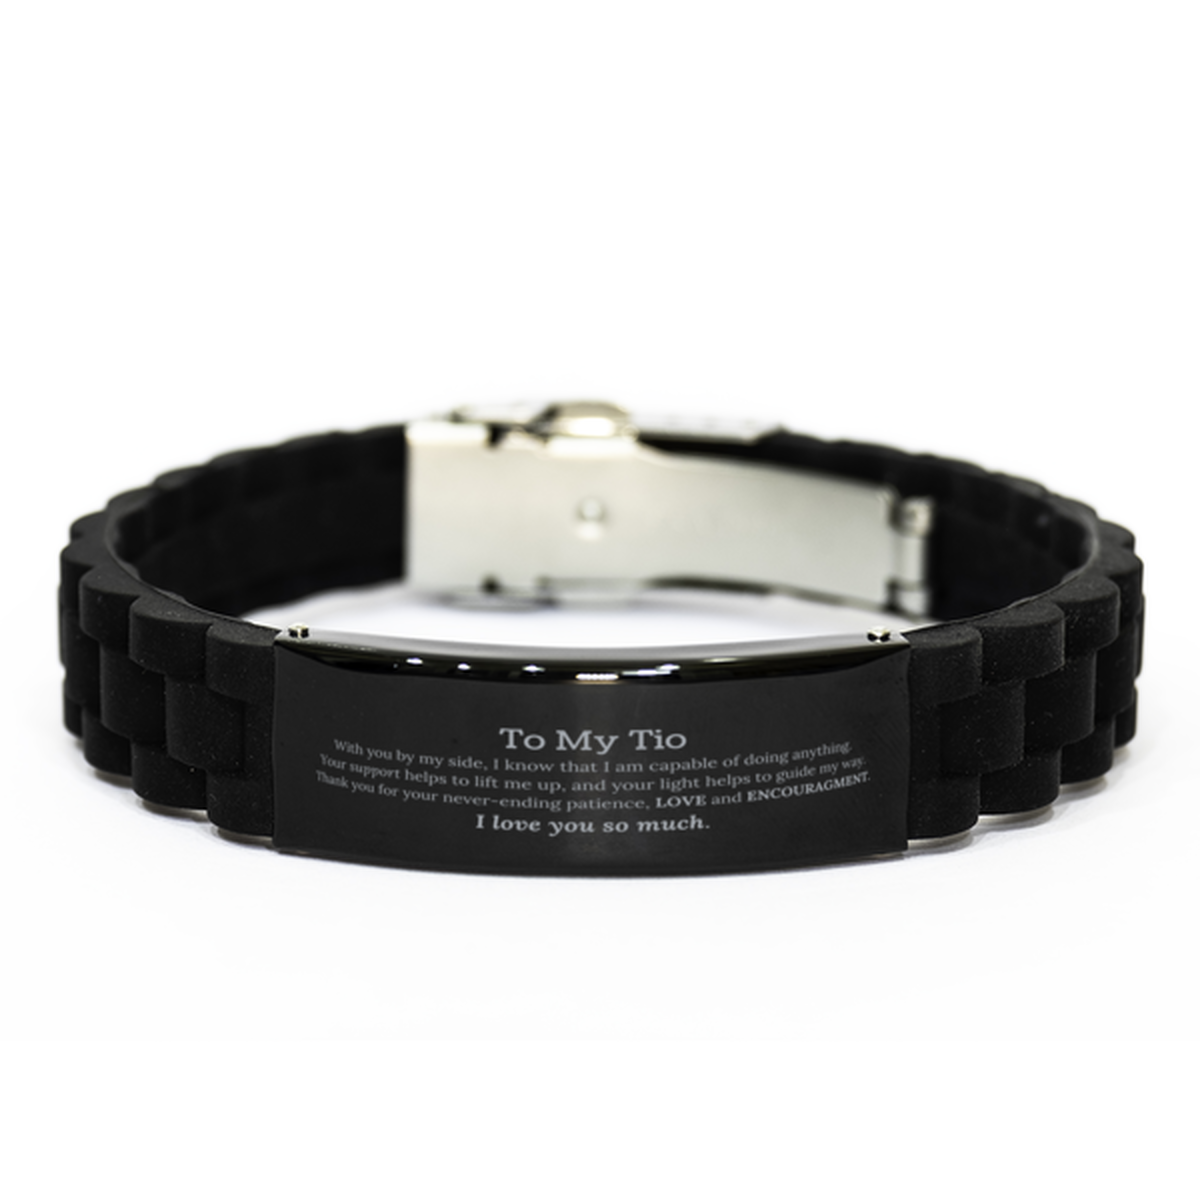 Appreciation Tio Black Glidelock Clasp Bracelet Gifts, To My Tio Birthday Christmas Wedding Keepsake Gifts for Tio With you by my side, I know that I am capable of doing anything. I love you so much